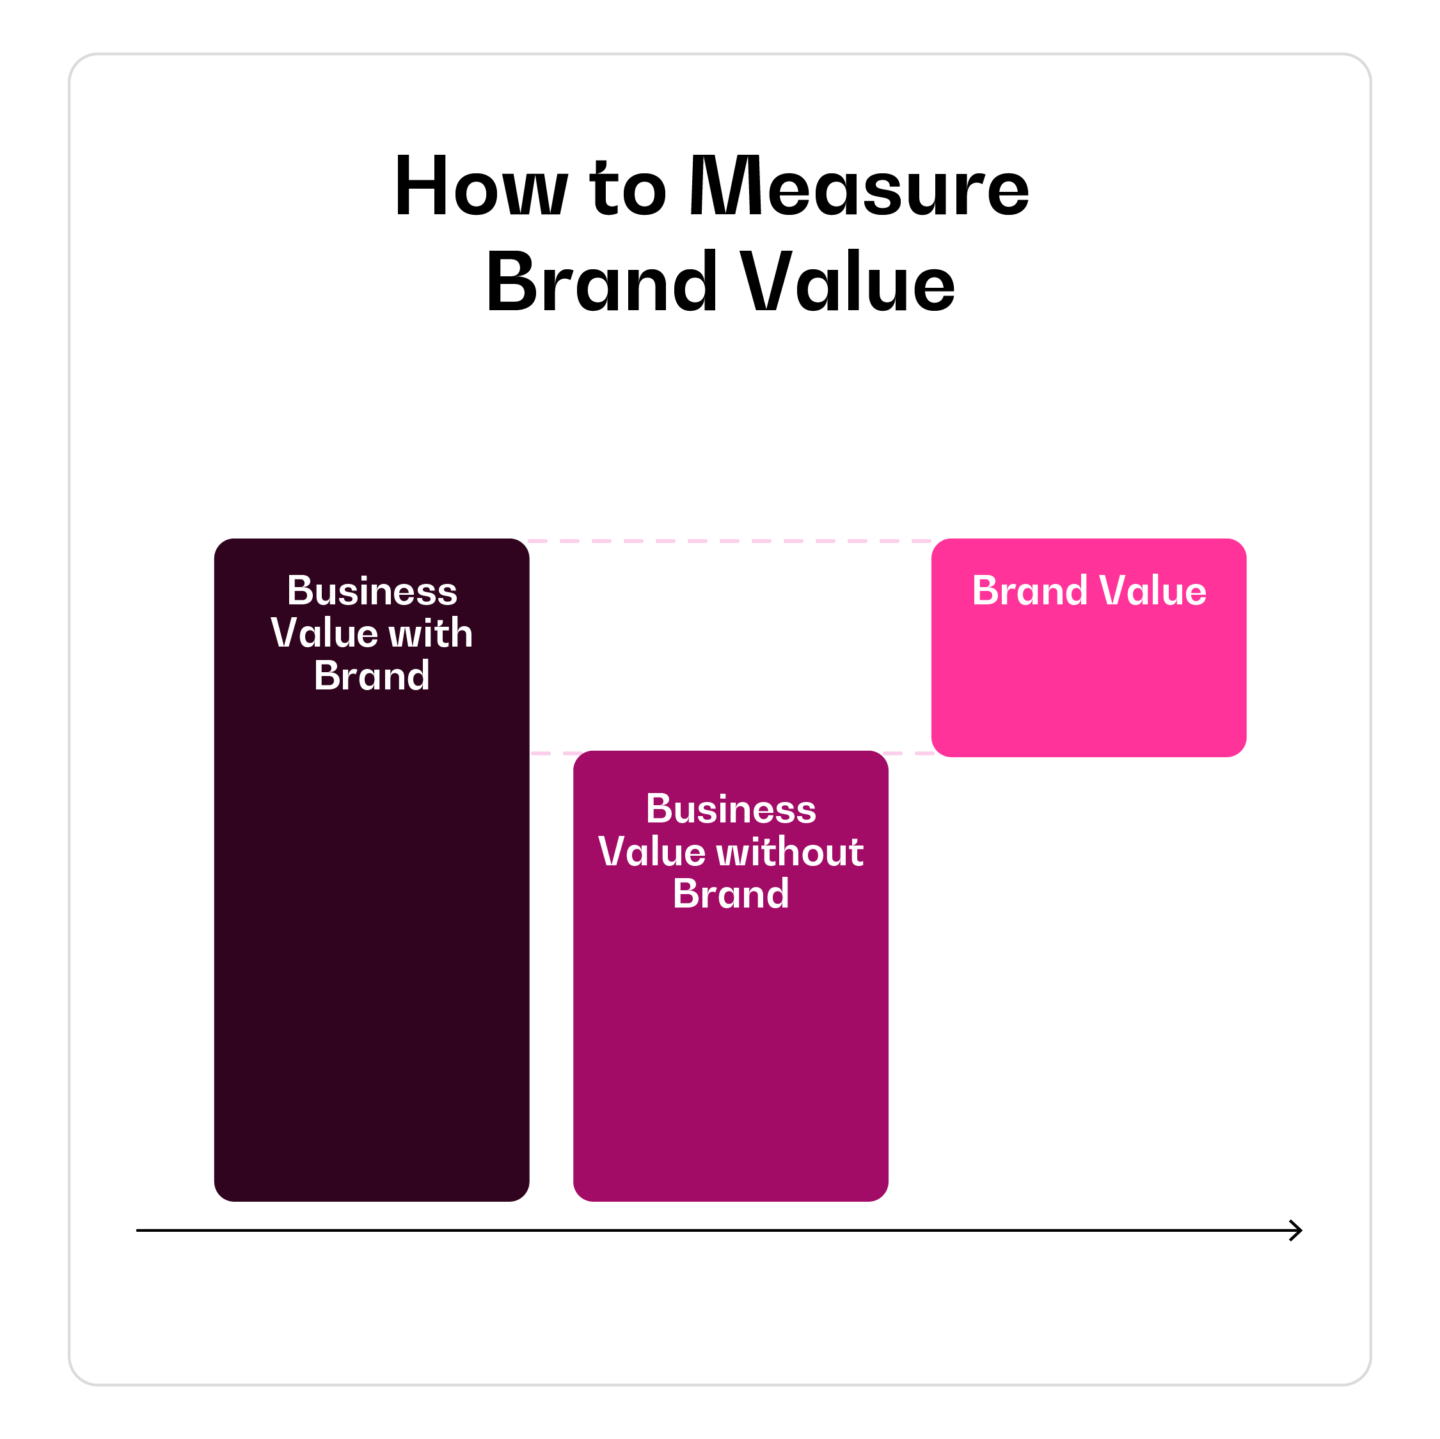 How to measure brand value.